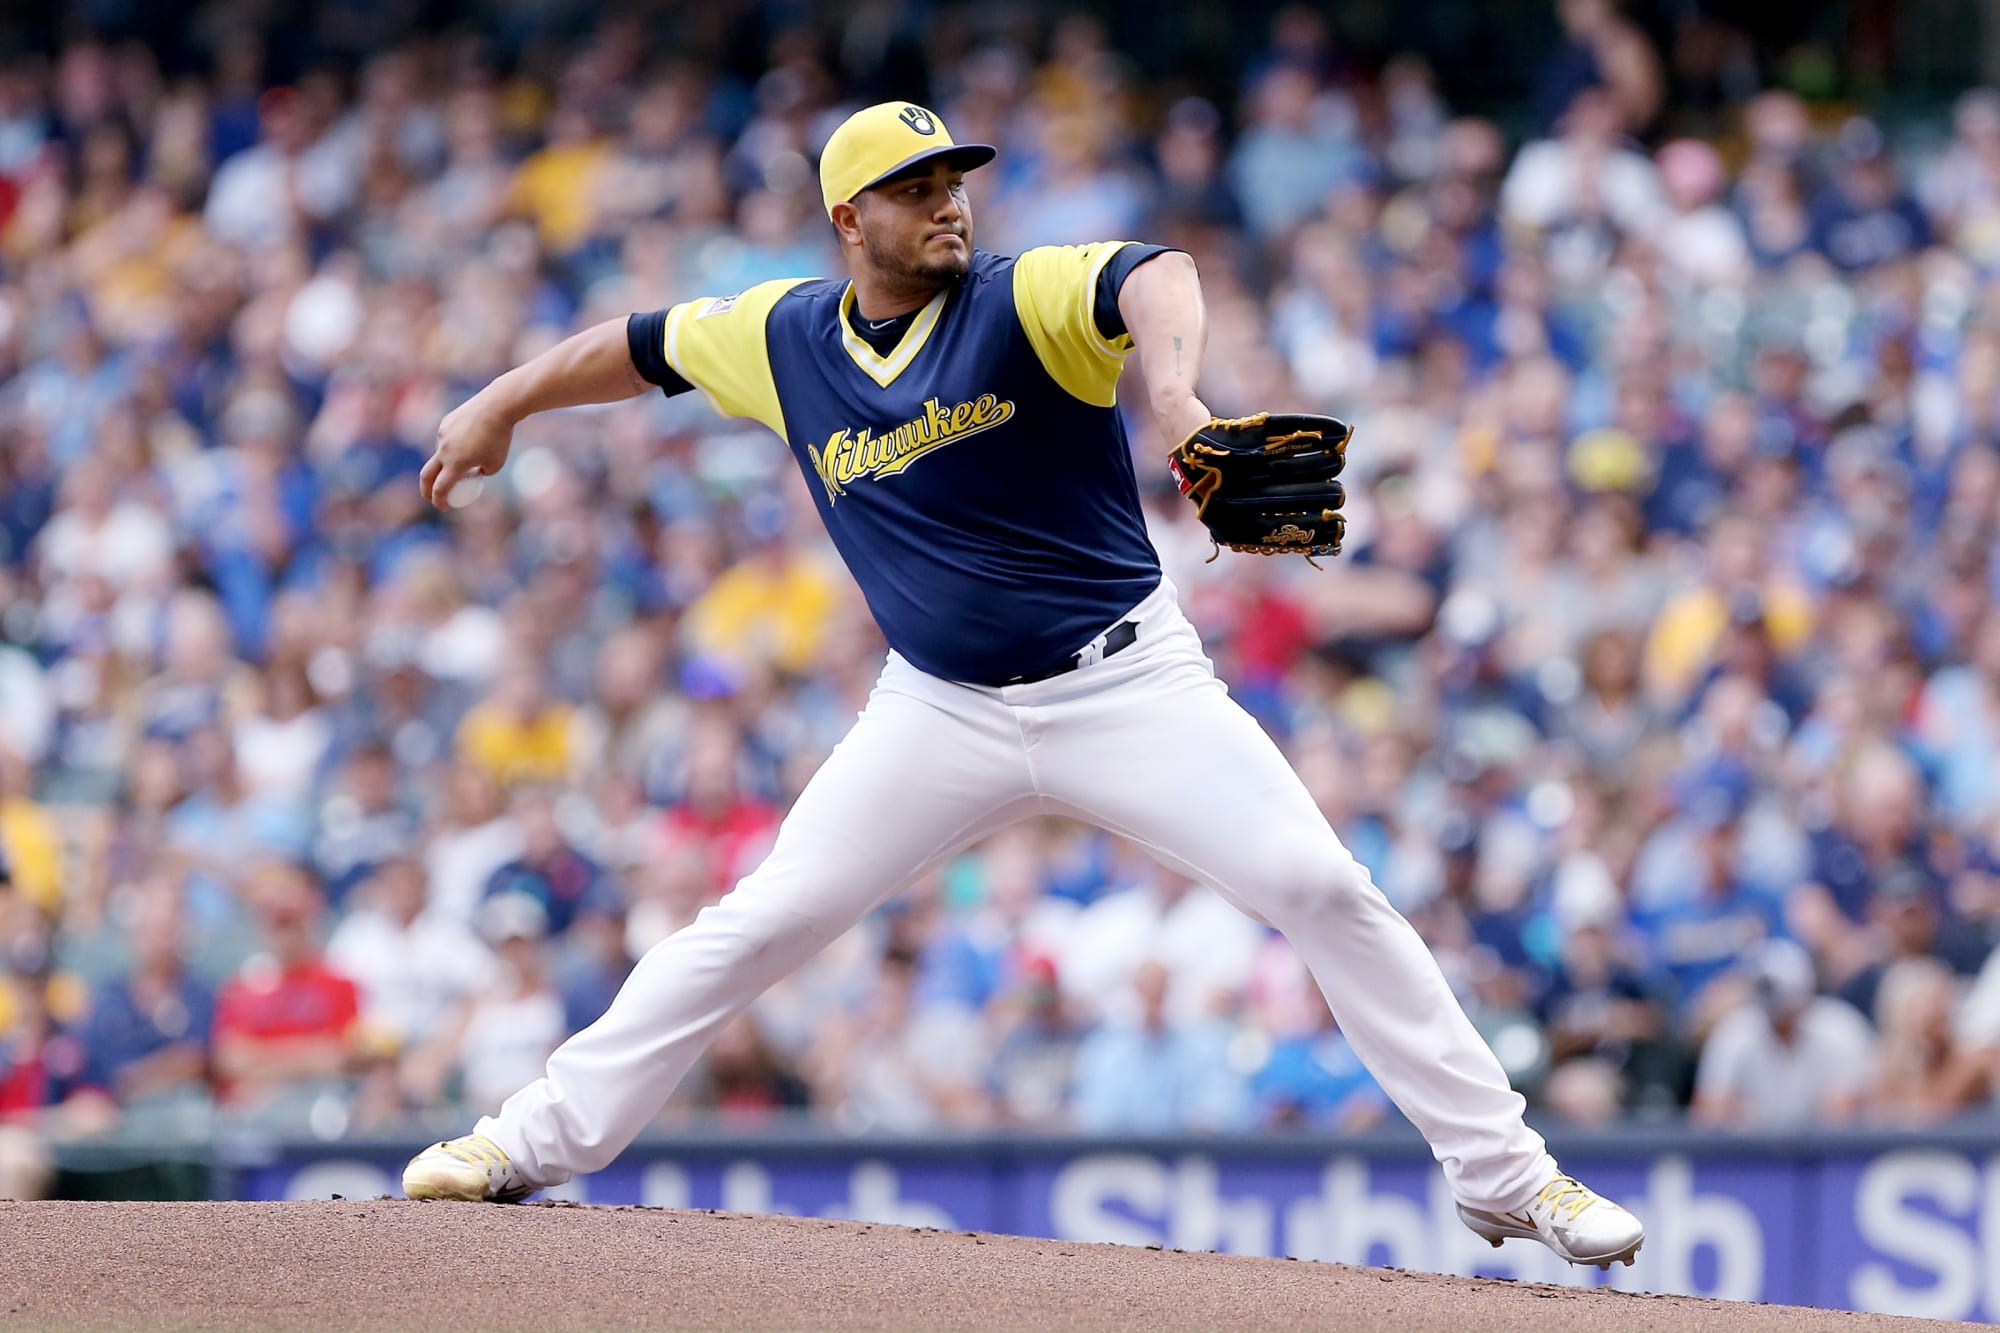 Milwaukee Brewers Who Is Crew's Best Pitcher Behind Jhoulys Chacin?